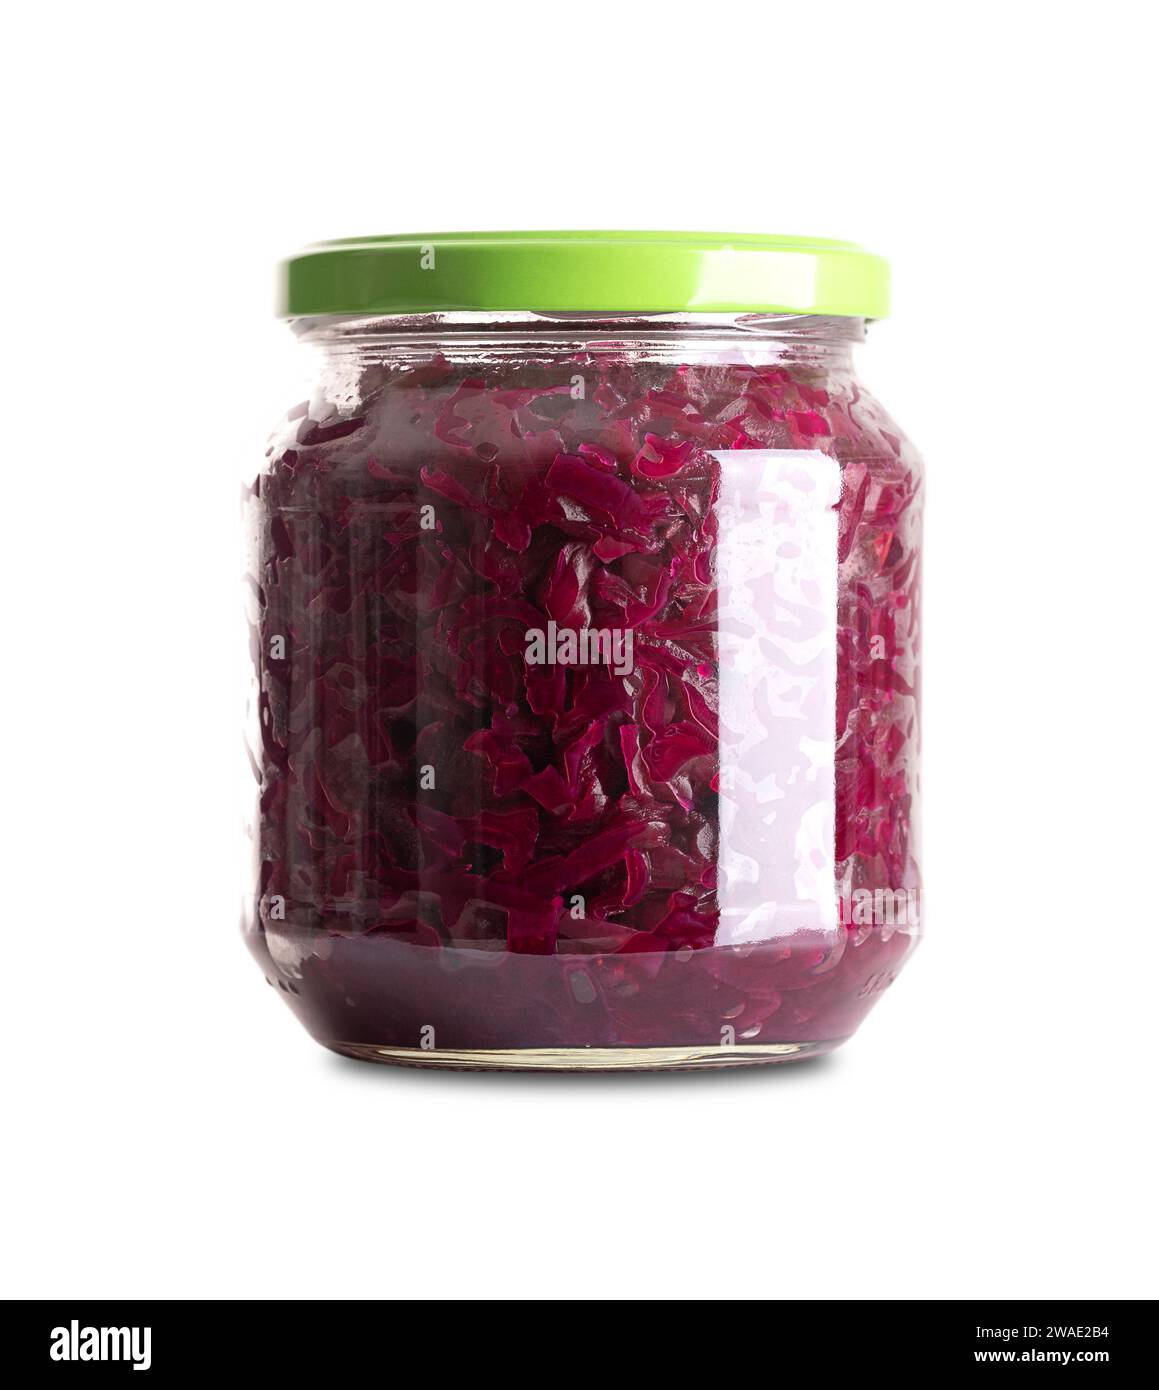 Red cabbage, homemade fermented German Blaukraut in glass jar with lid. Raw red cabbage, fermented by lactic acid bacteria. Stock Photo